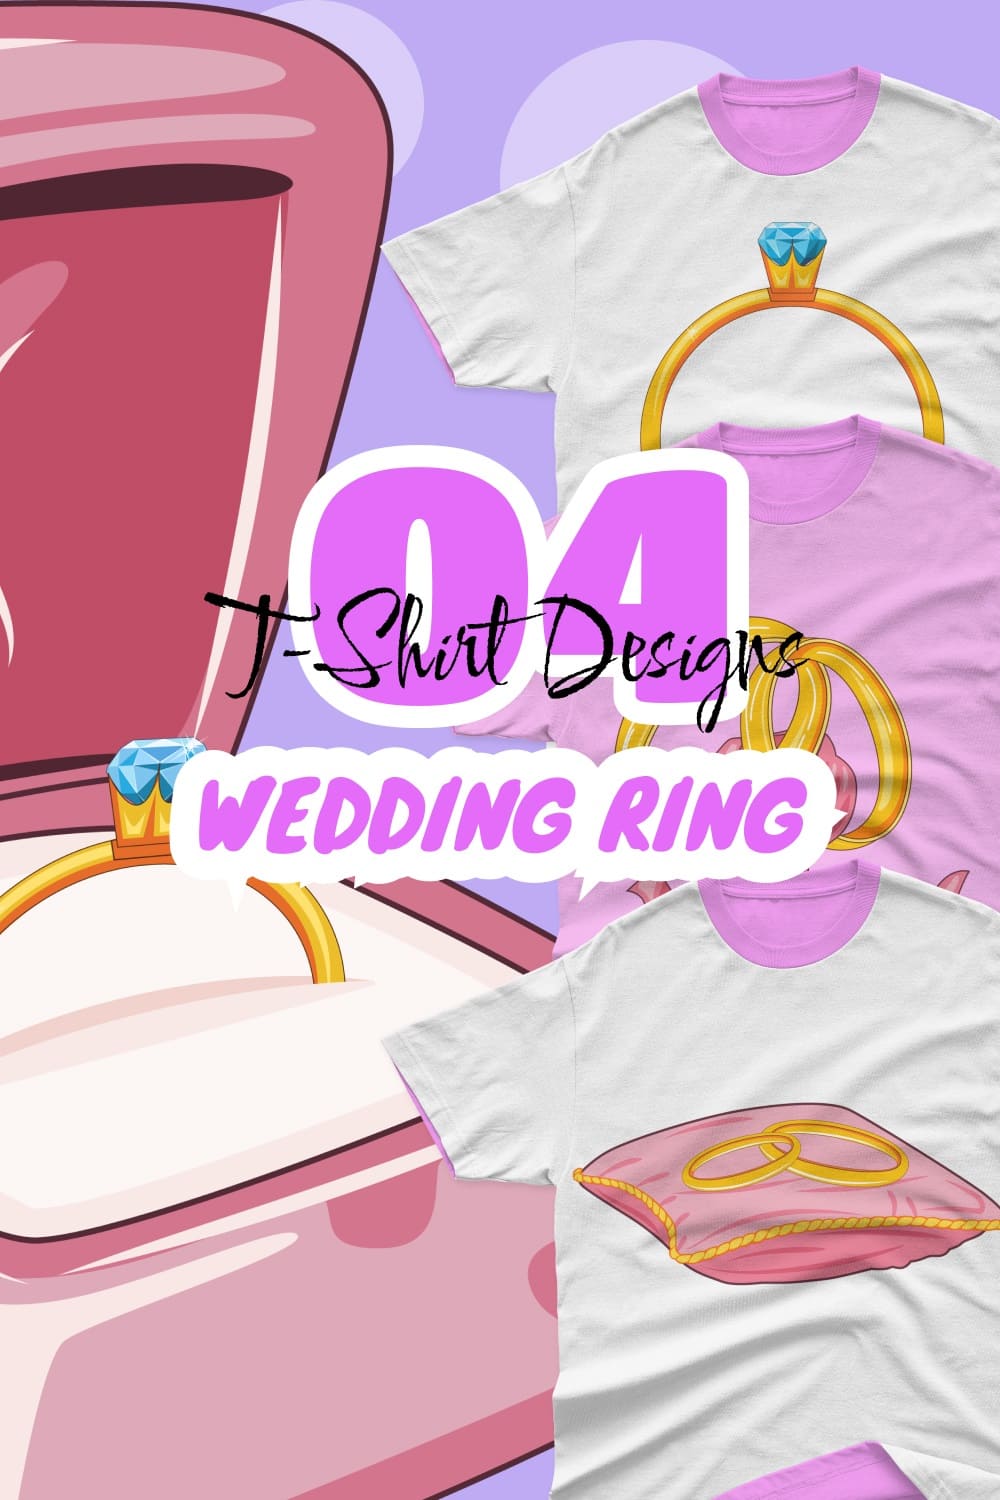 Gold wedding rings with precious stones are depicted on T-shirts.